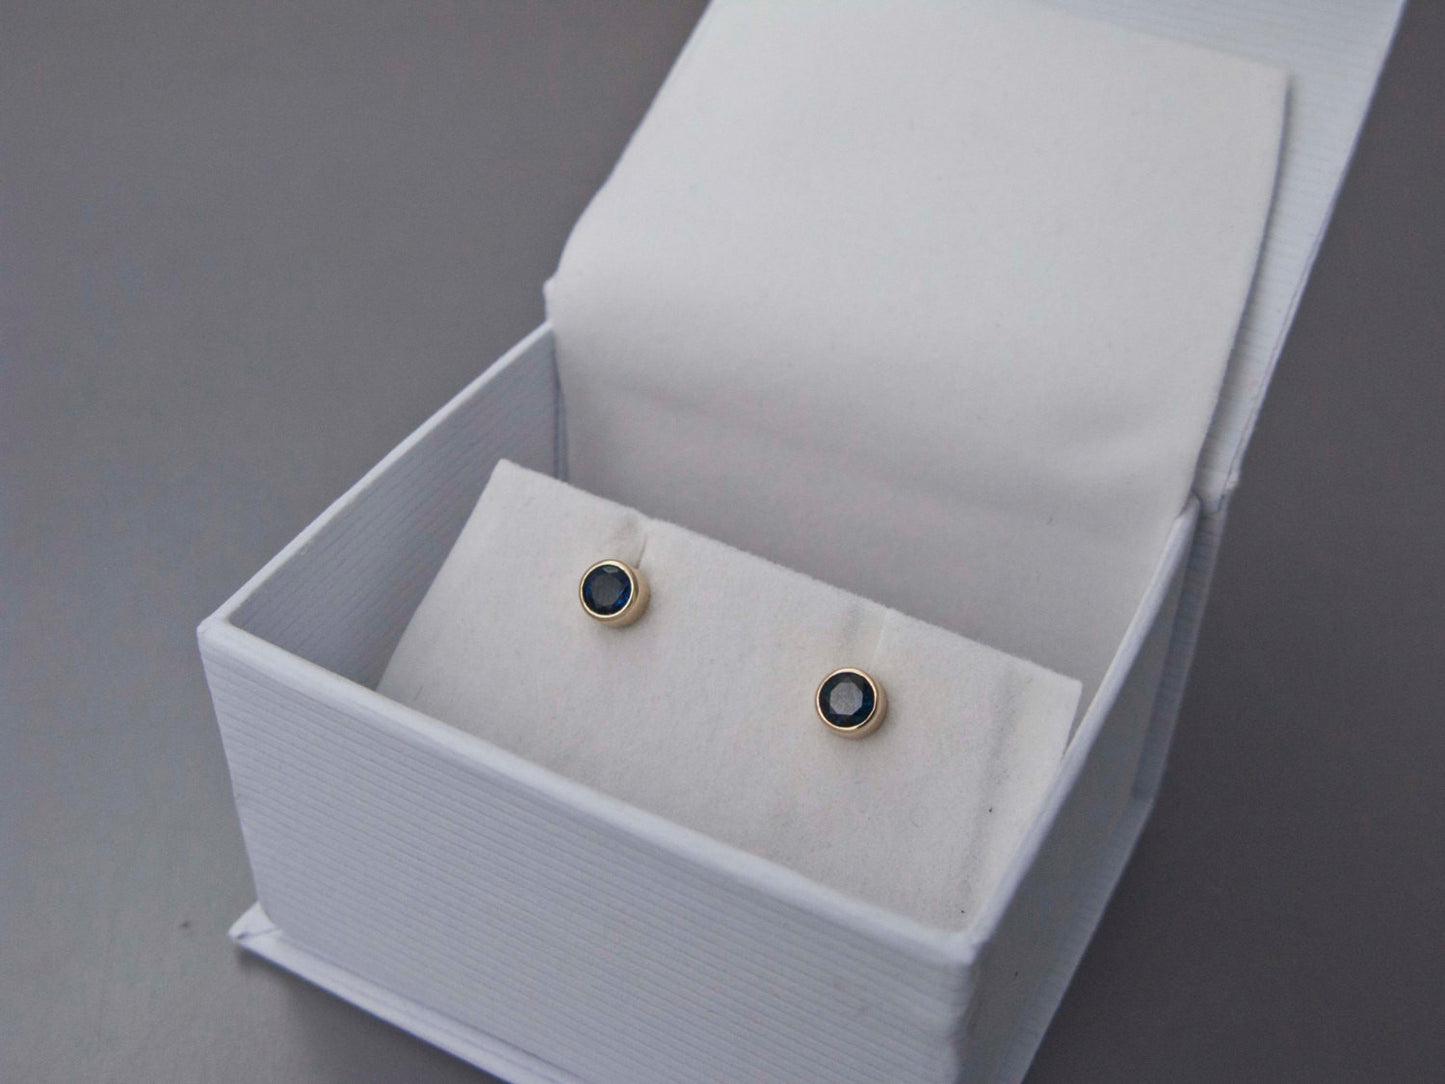 Blue Sapphire Stud Earrings in 14k Gold Bezels - Choice of yellow or white gold